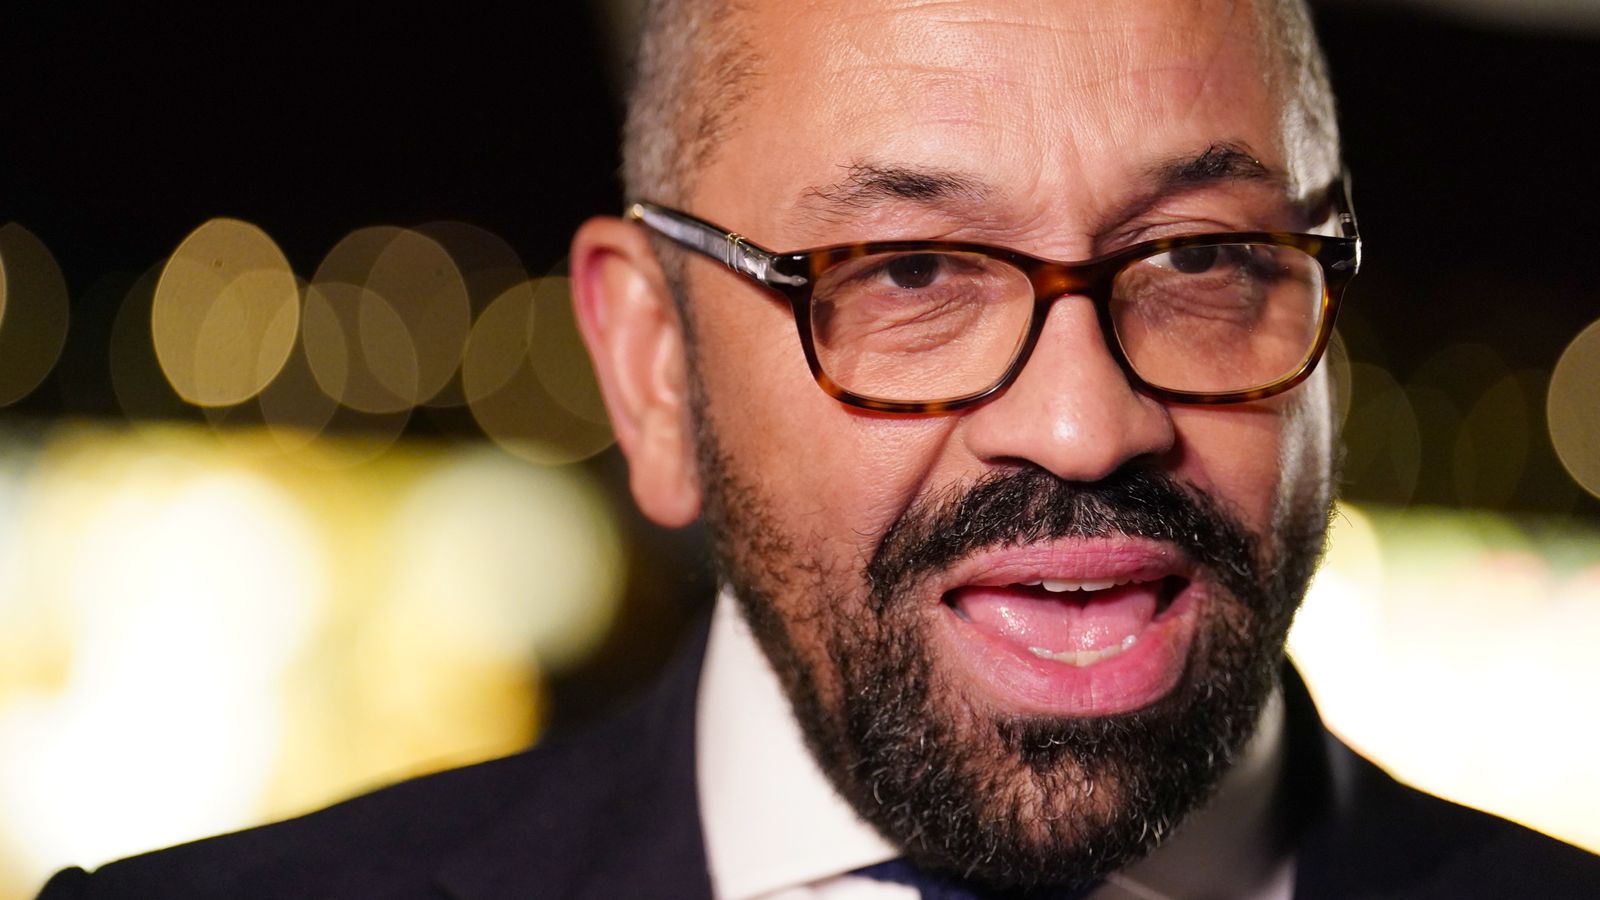 Home Secretary James Cleverly apologises after joking about spiking his wife's drink